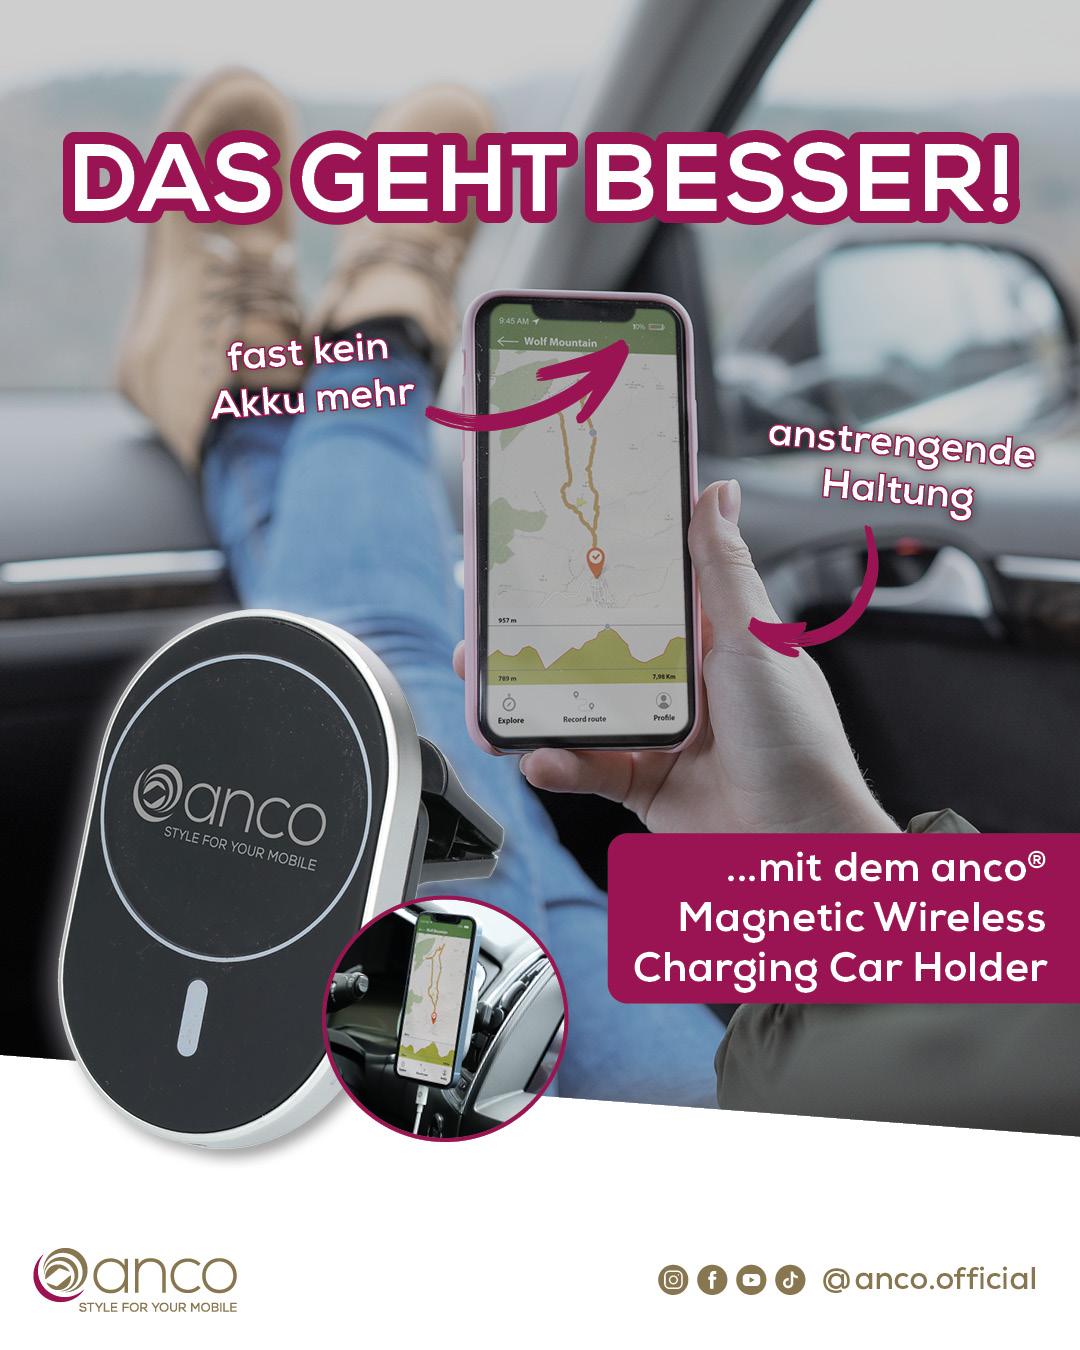 anco® Magnetic Wireless Charging Car Holder